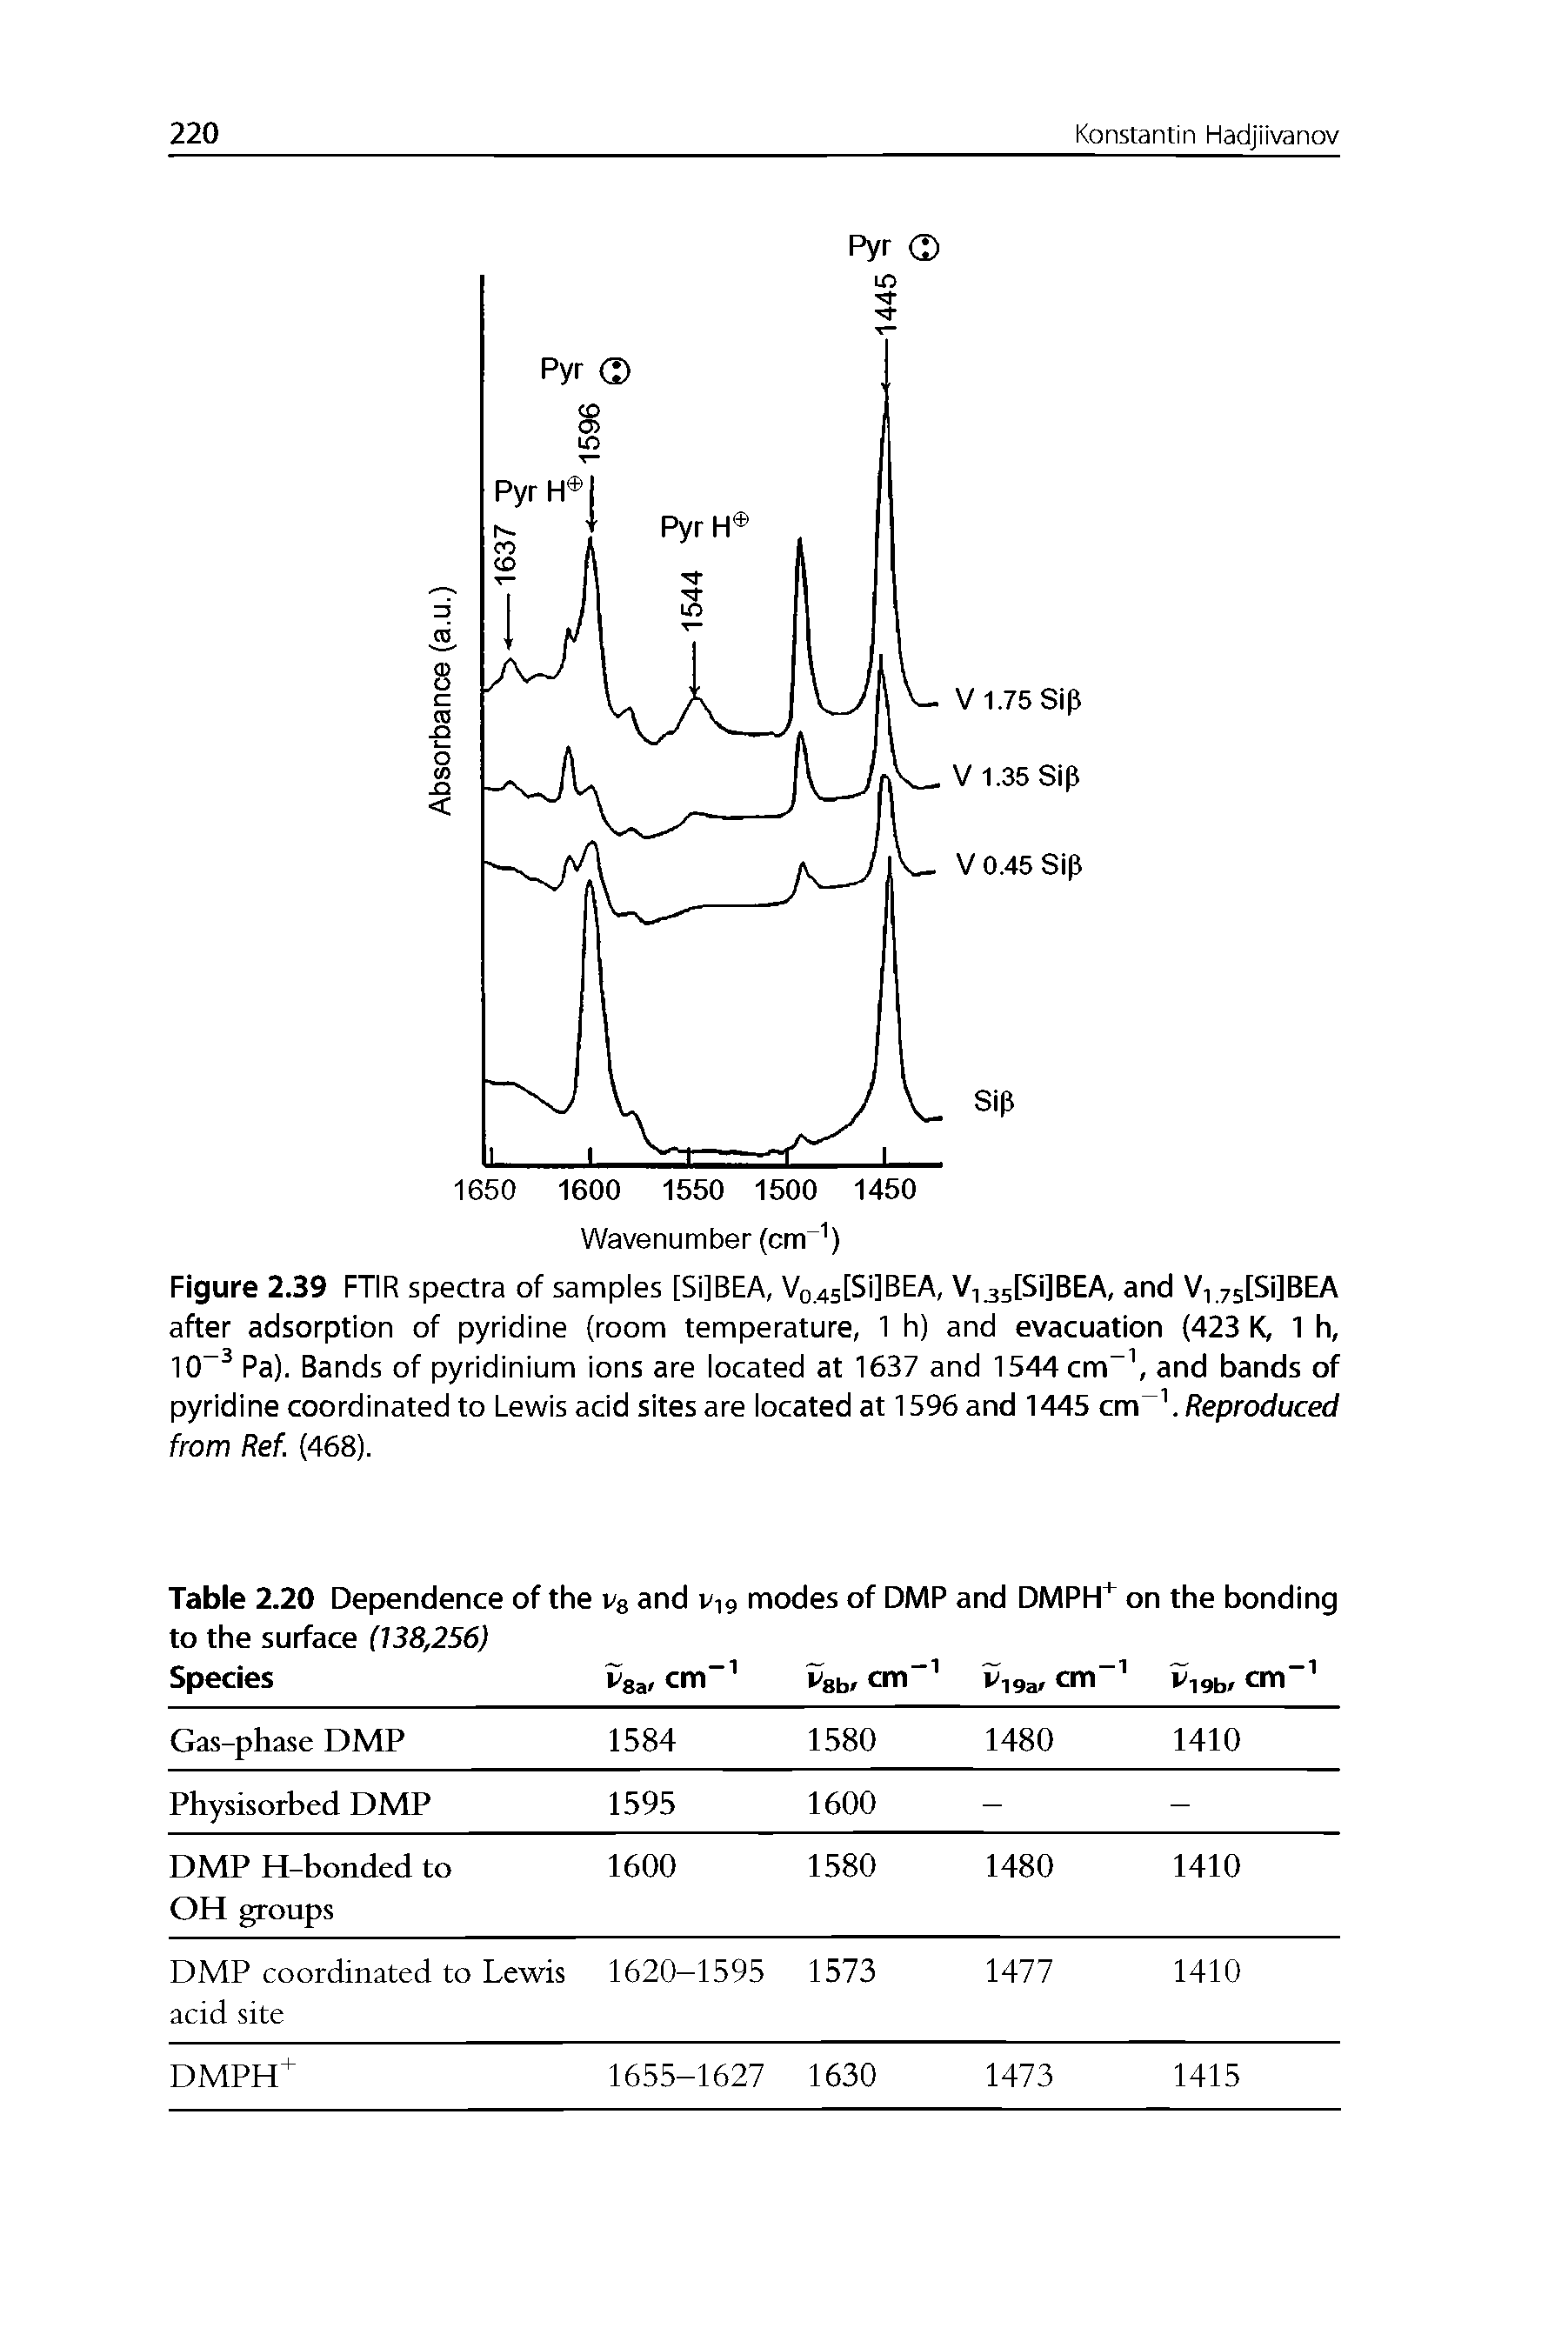 Figure 2.39 FTIR spectra of samples [Si]BEA, Vo.45[Si]BEA, V,35[Si]BEA, and VusfSilBEA after adsorption of pyridine (room temperature, 1 h) and evacuation (423 K, 1 h, 10 Pa). Bands of pyridinium ions are located at 1637 and 1544 cm and bands of pyridine coordinated to Lewis acid sites are located at 1596 and 1445 cm. Reproduced from Ref. (468).